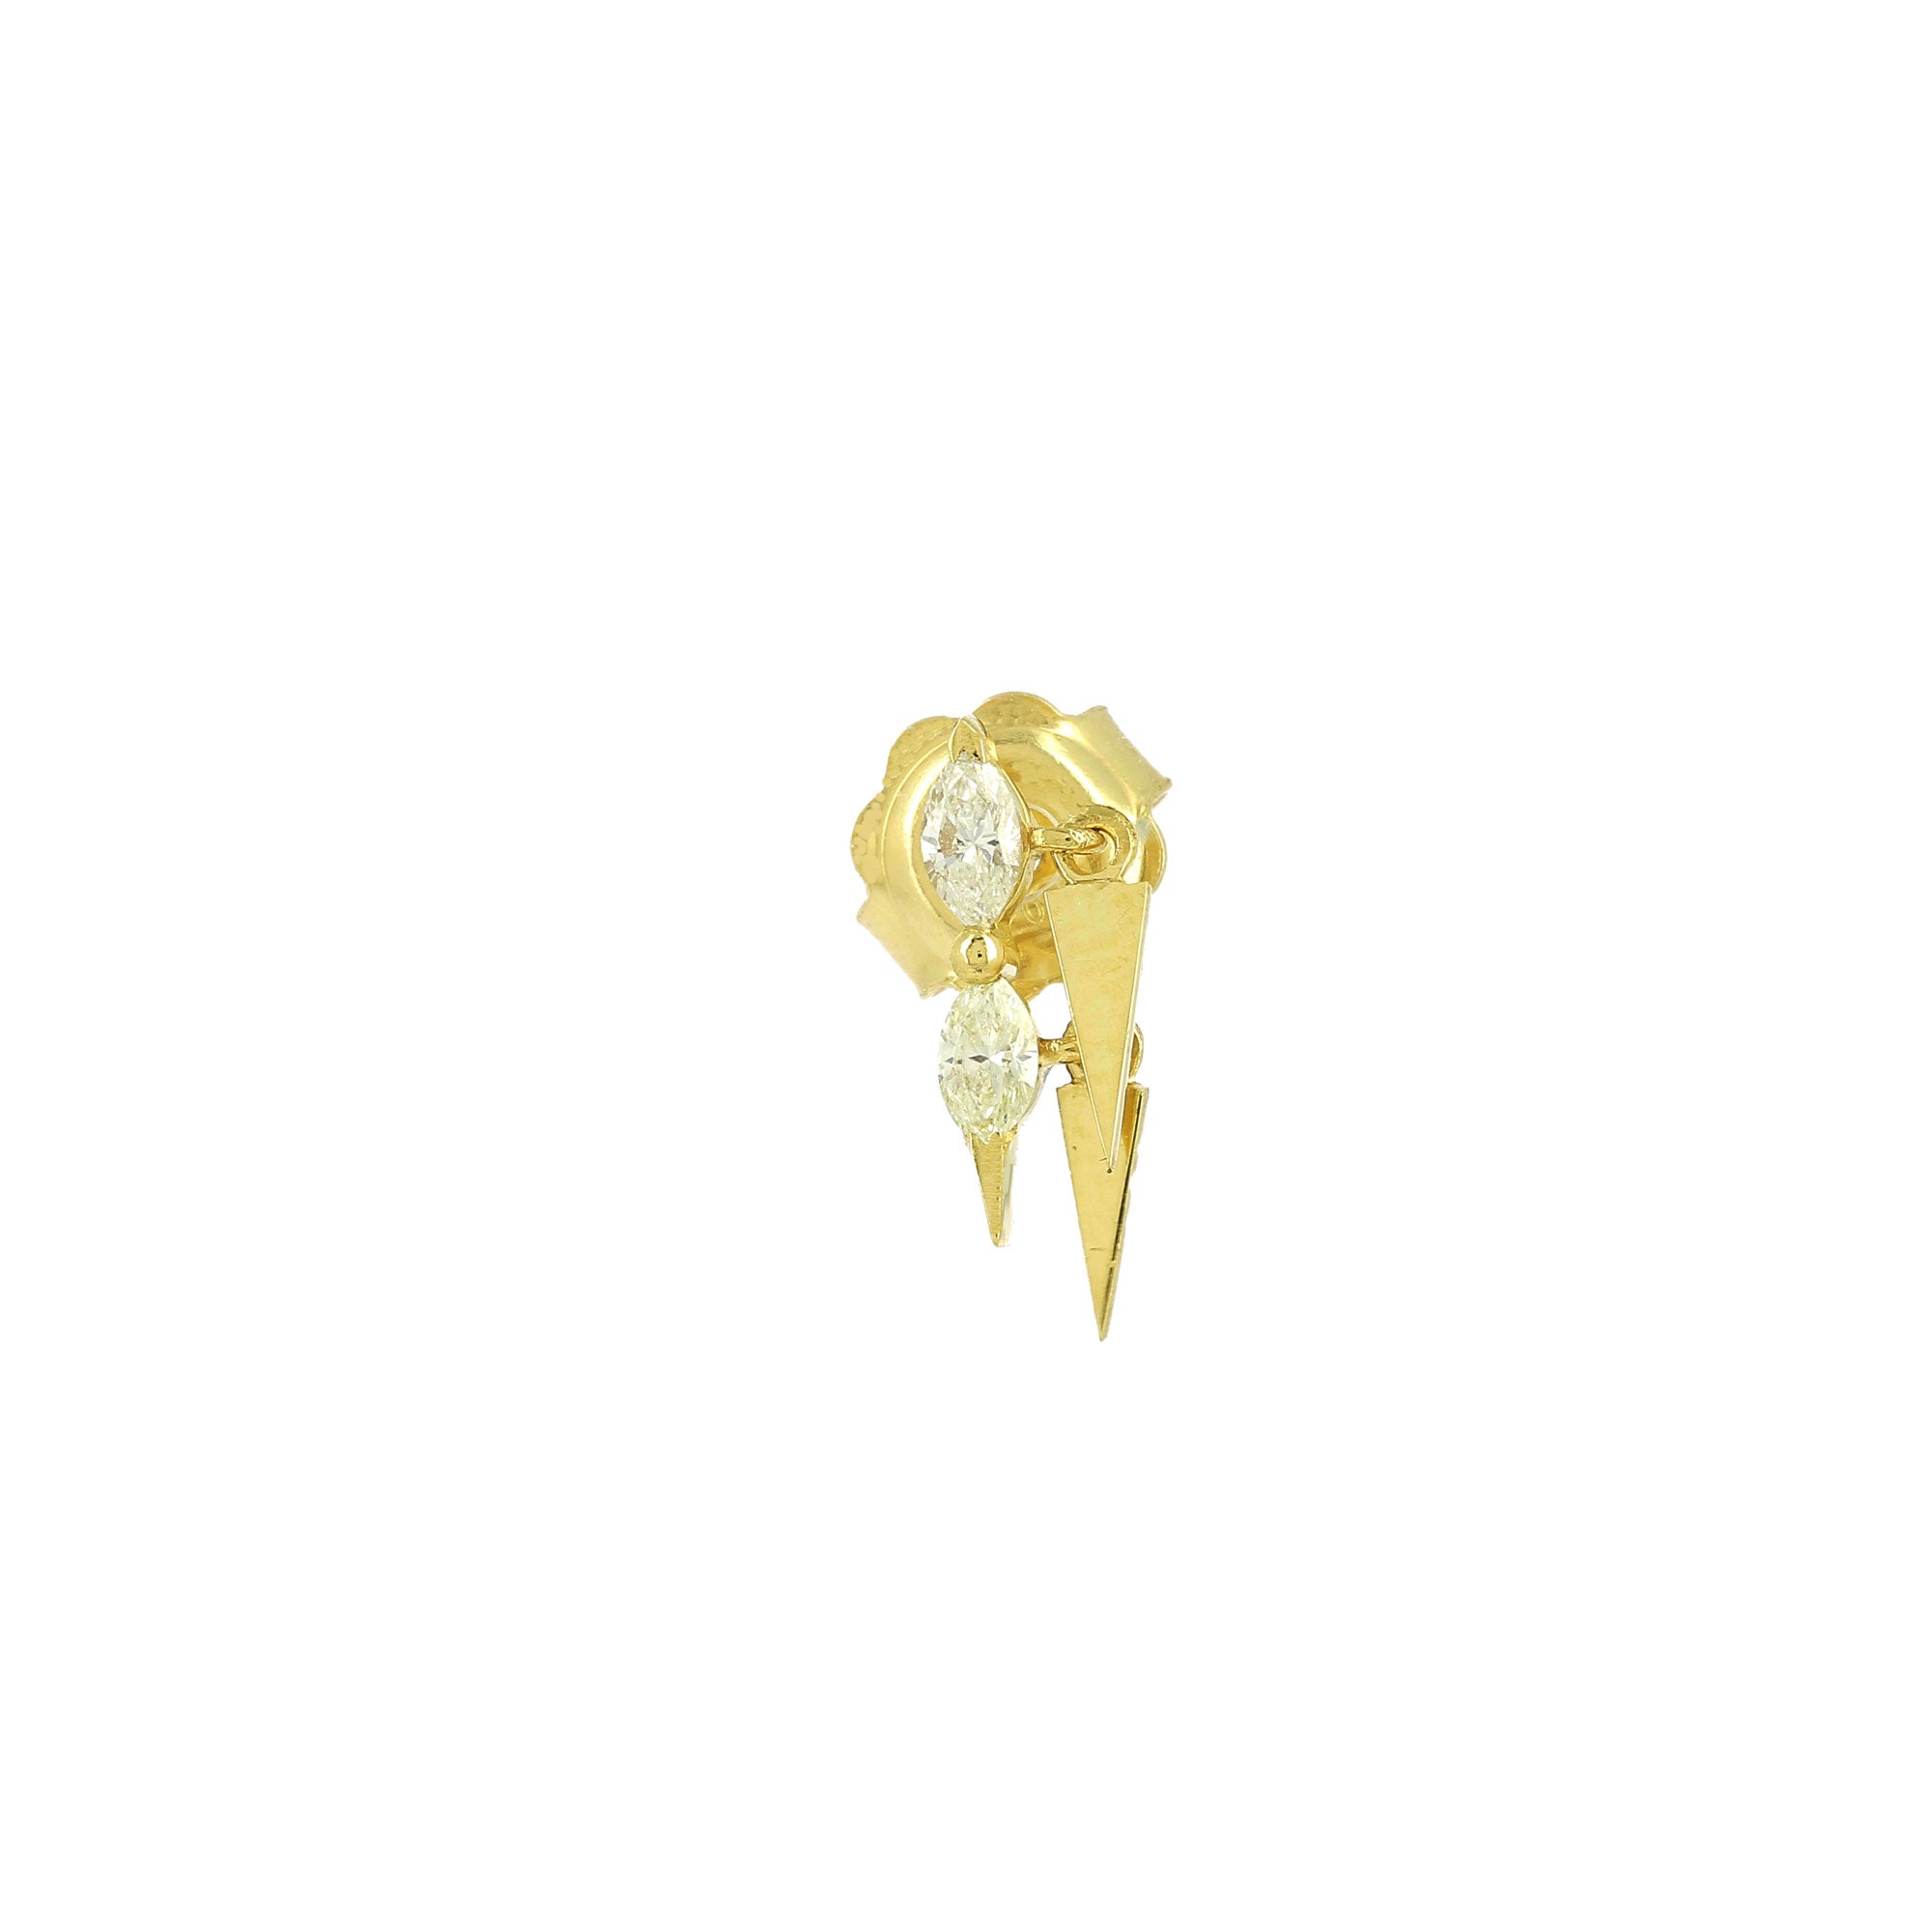 Doppelter Spike-Ohrring mit Marquise-Diamant